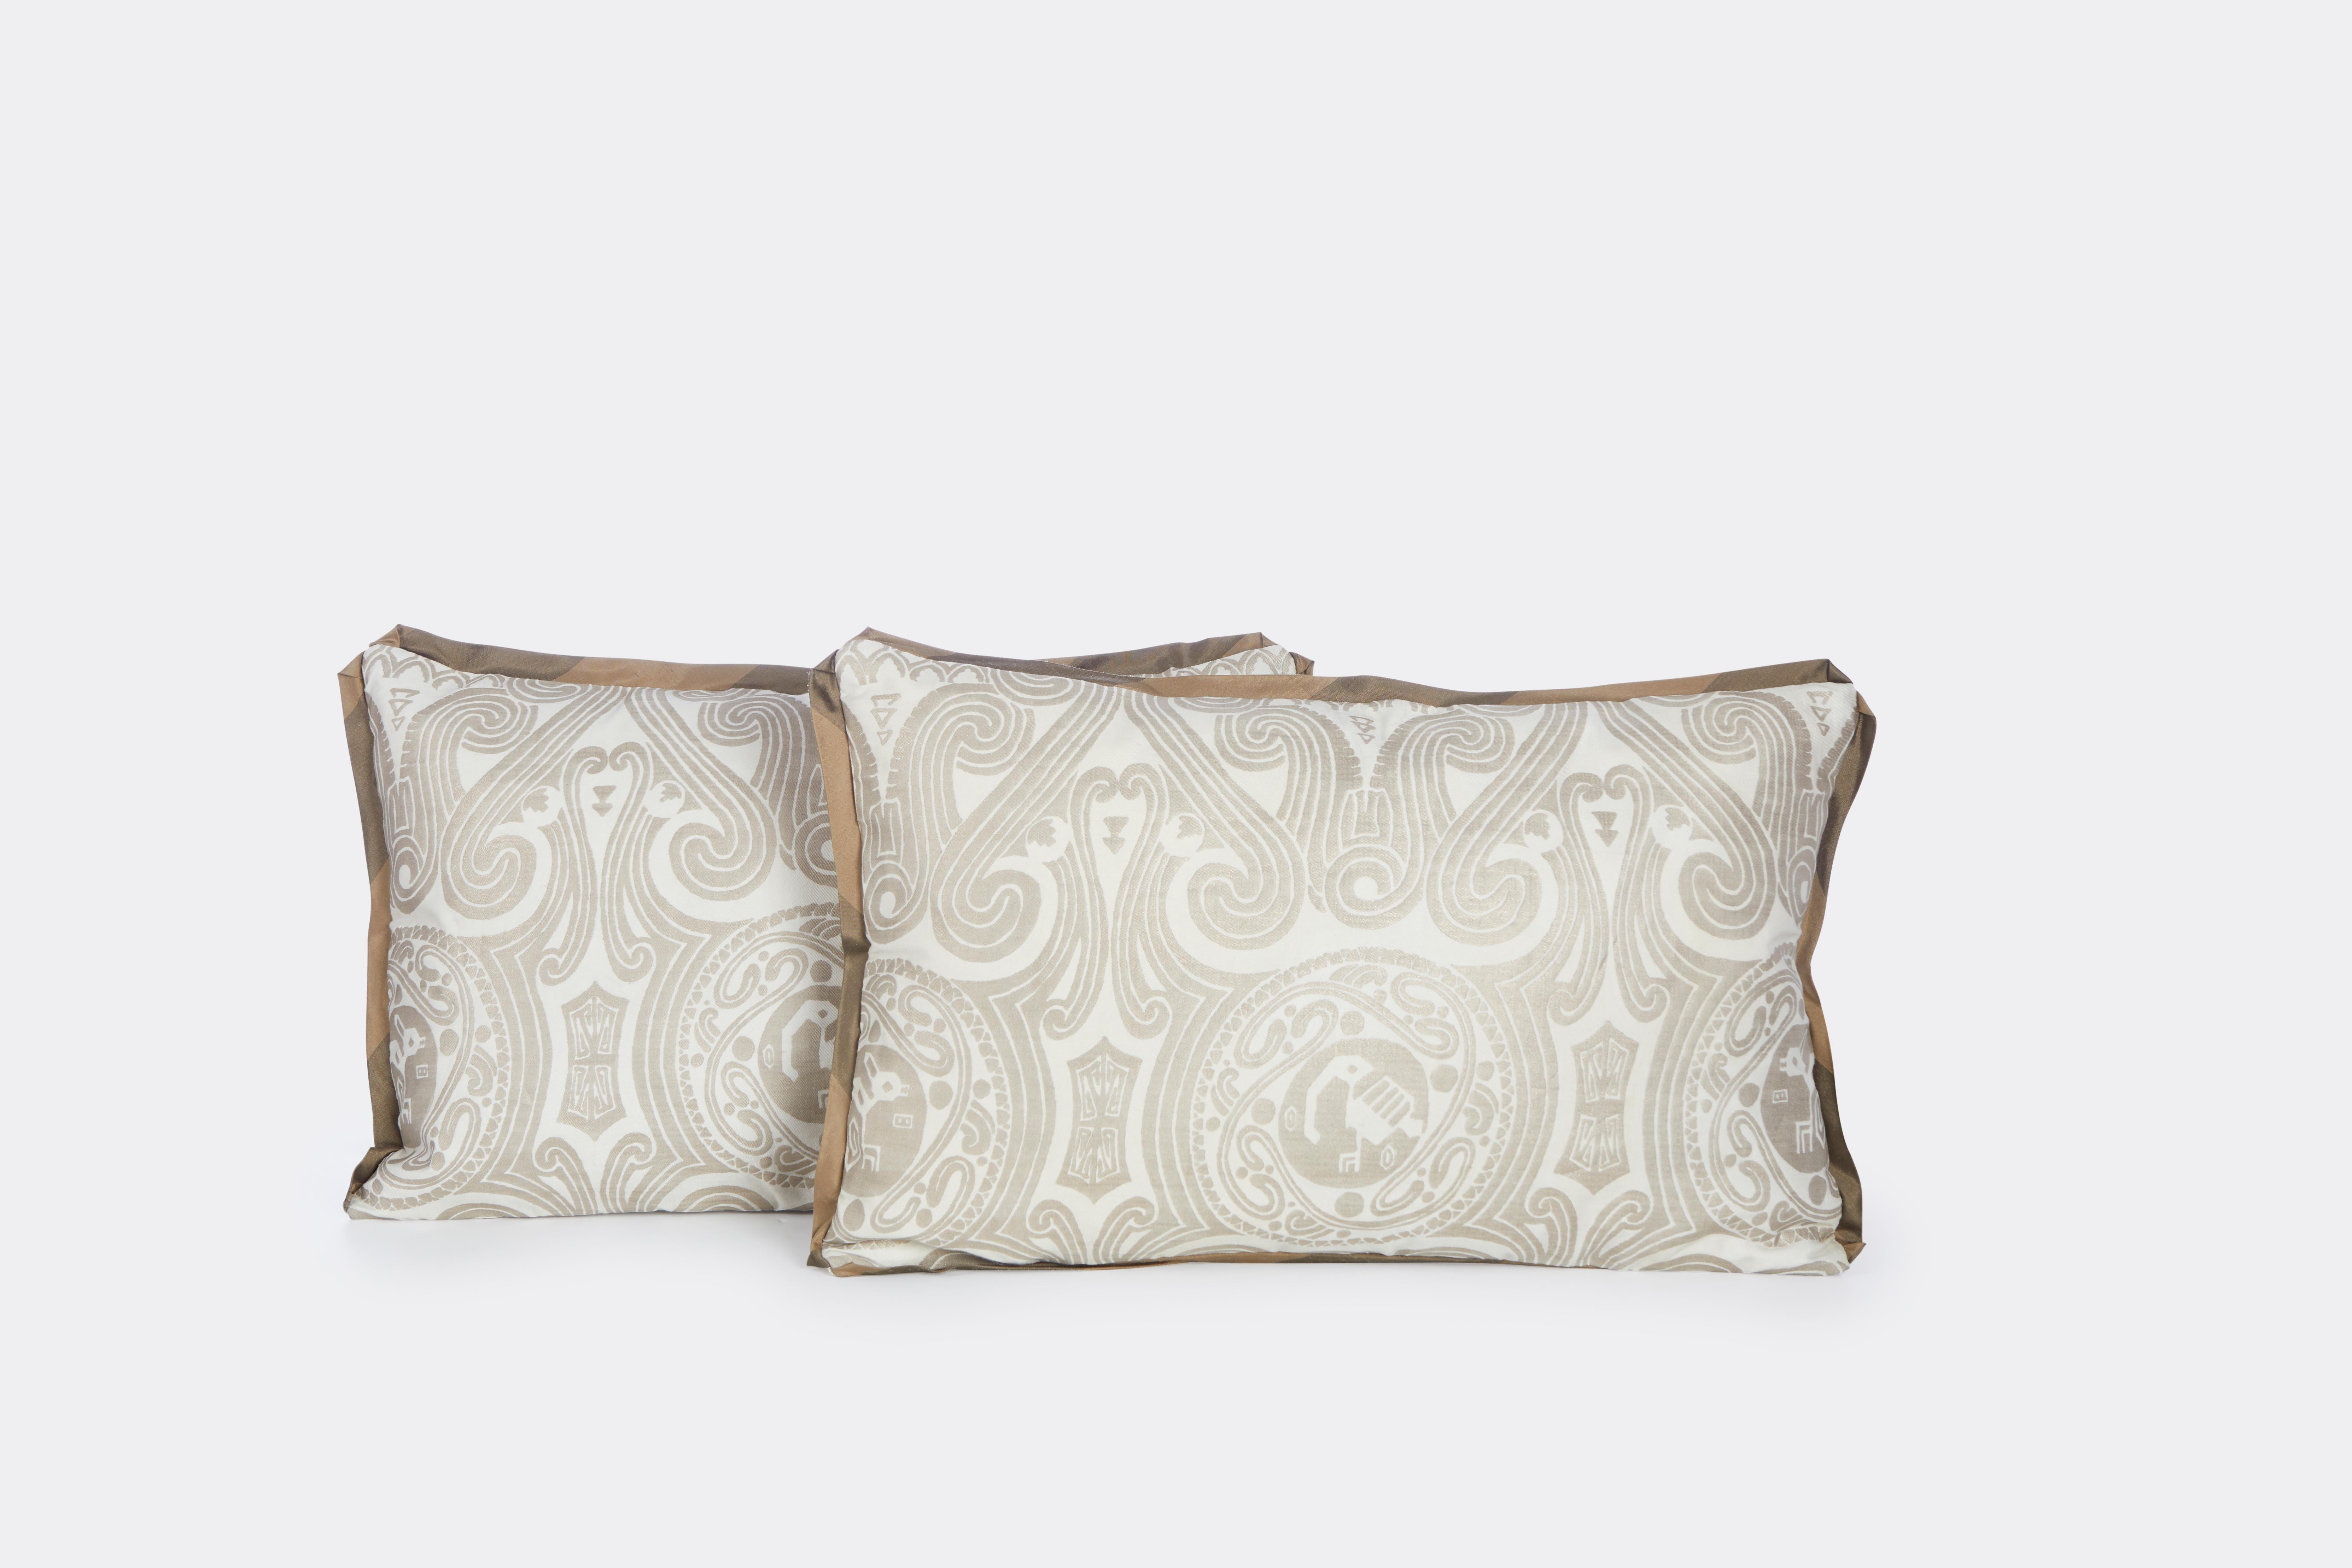 A pair of Fortuny Peruviano cushions ion silvery gold on white with striped bias edging and linen blend back.

Sales are final 